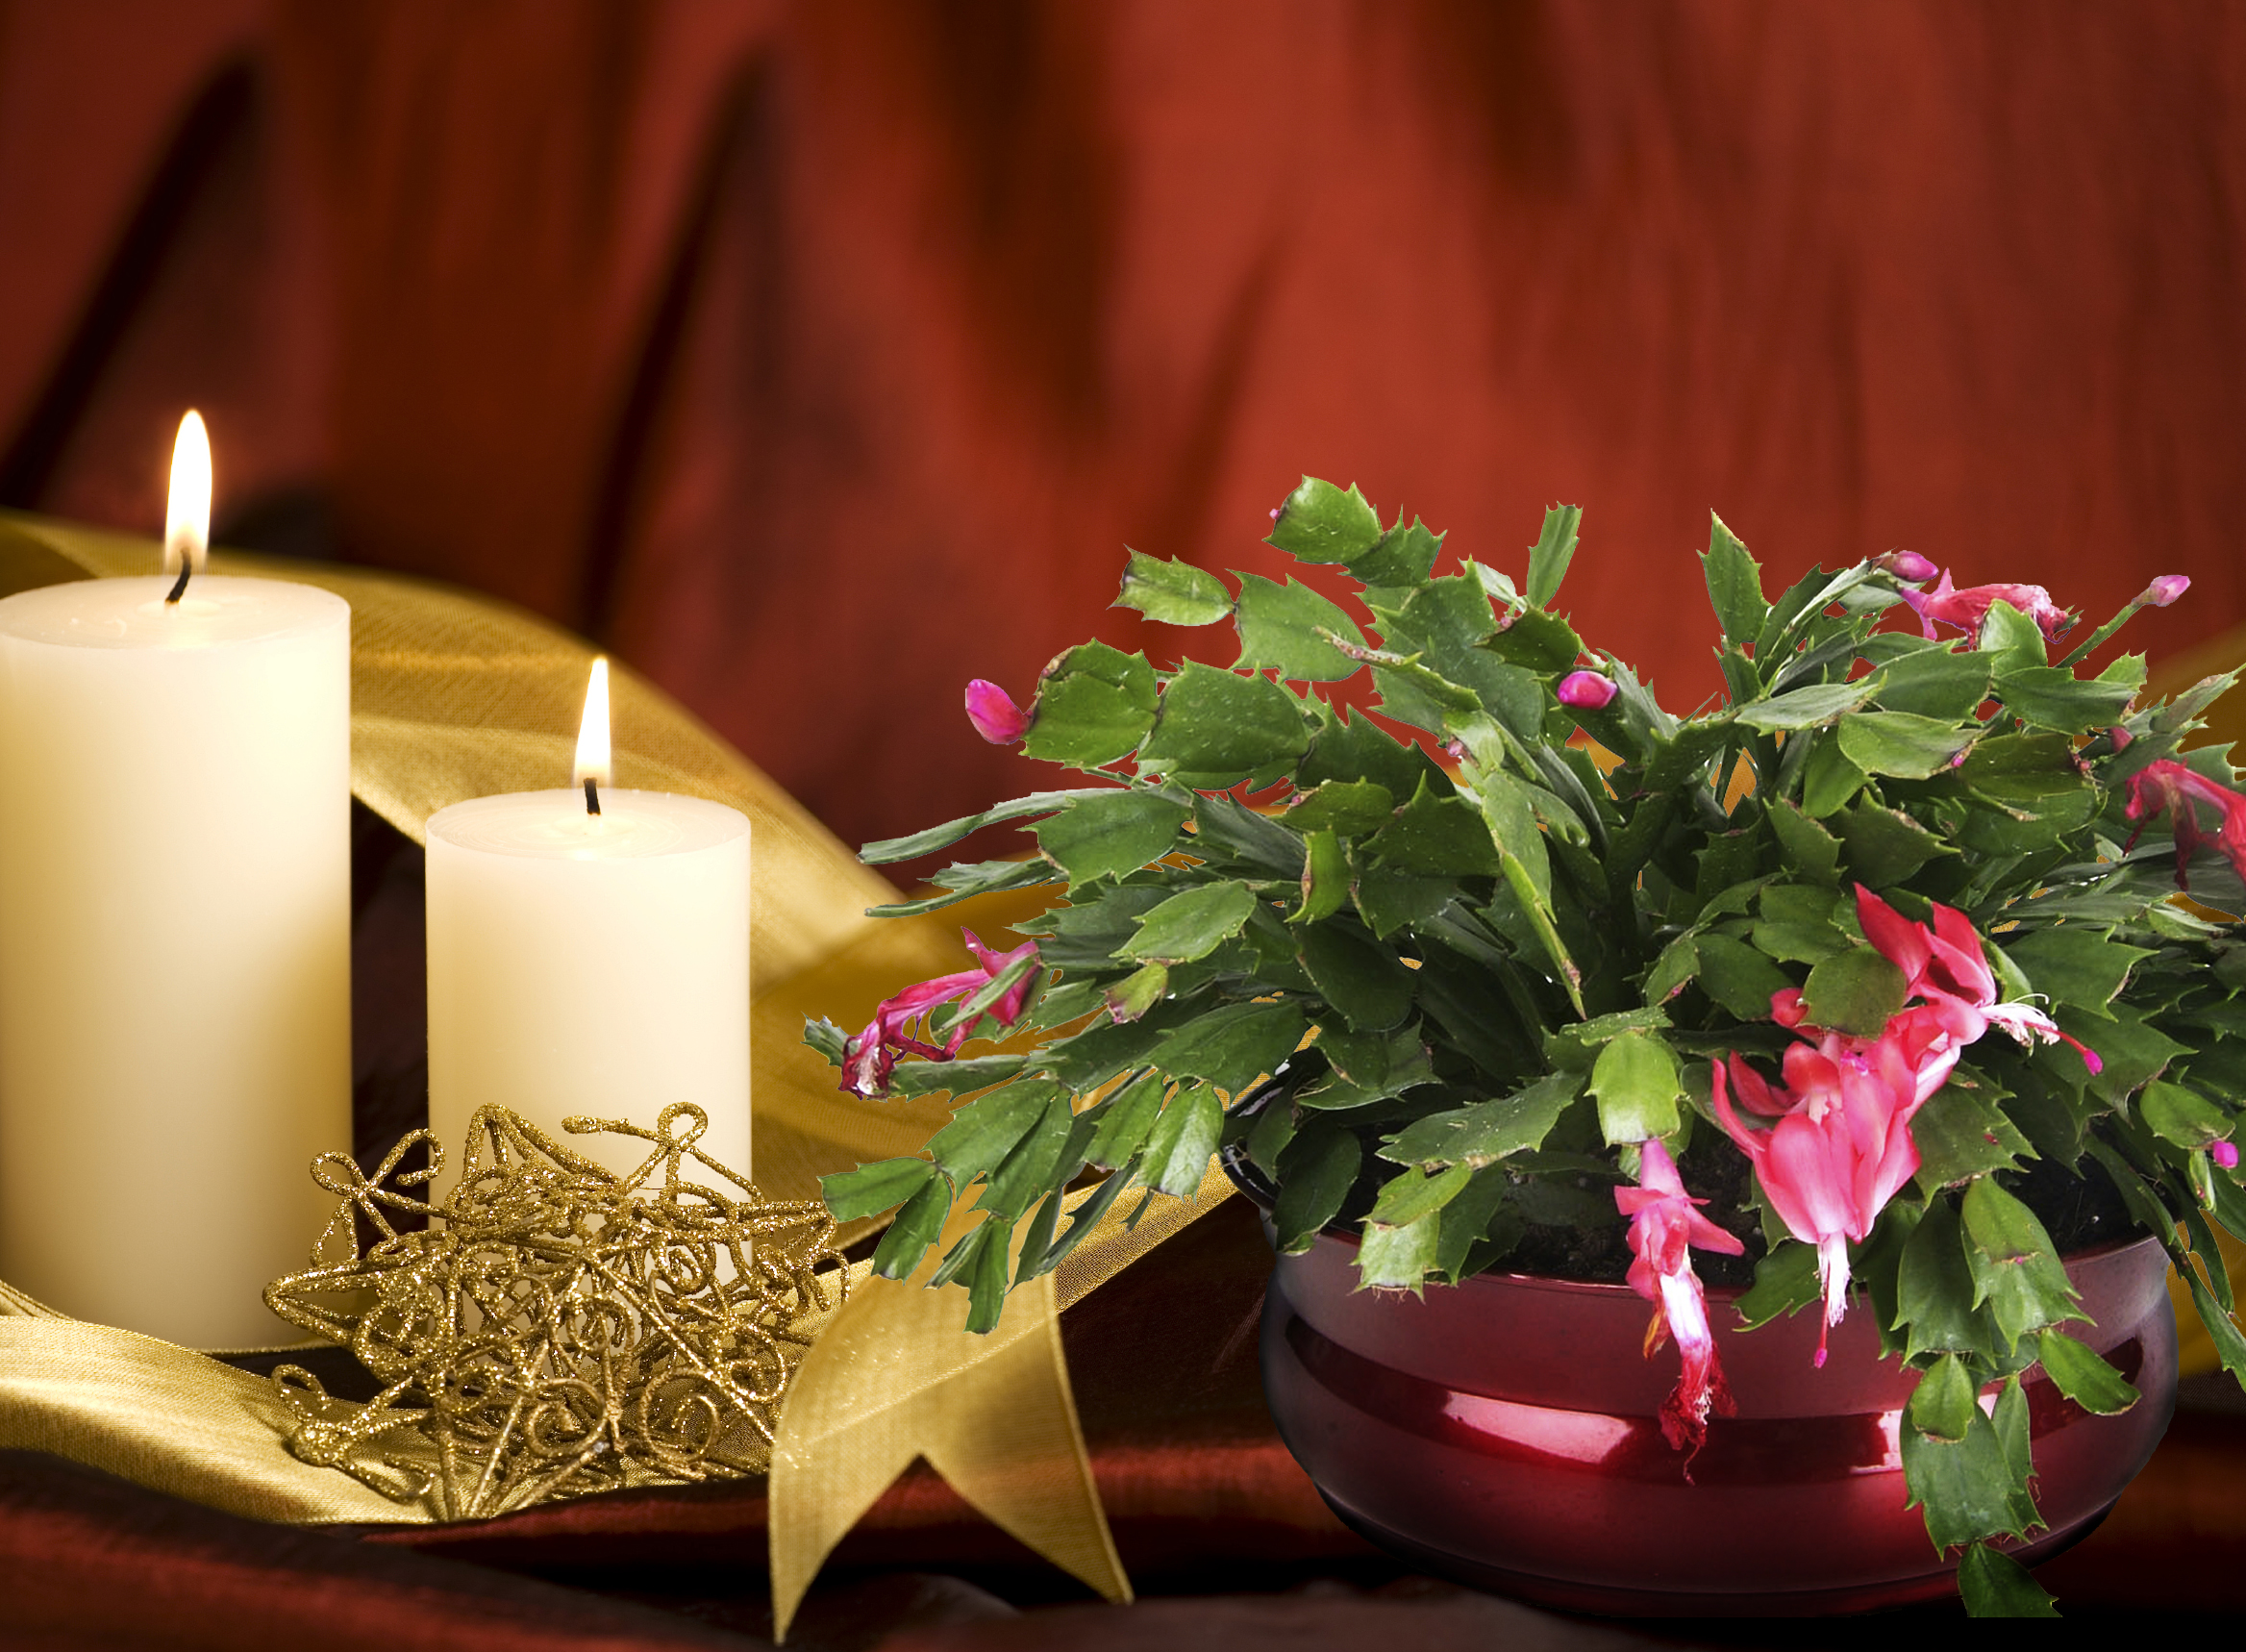 A Christmas cactus is a great tradition handed down through generations.